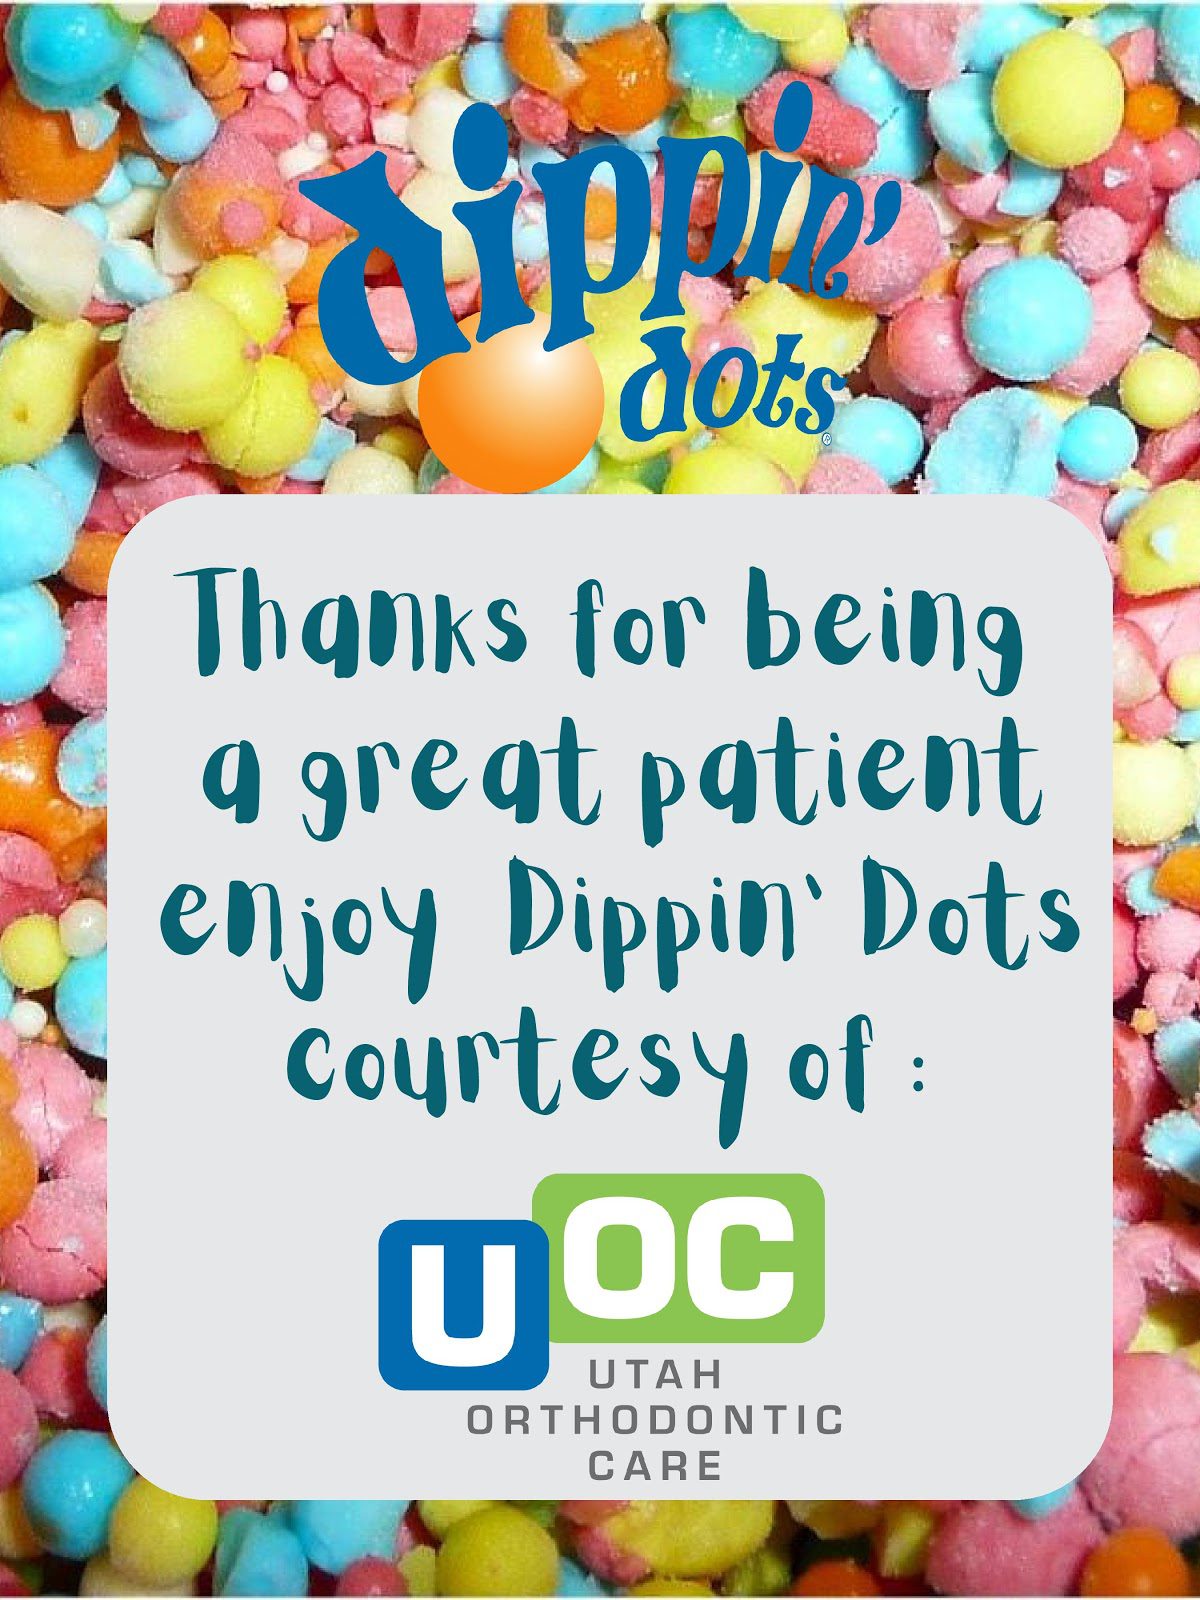 Utah Orthodontic Care Introduces: Dippin’ Dot Days!